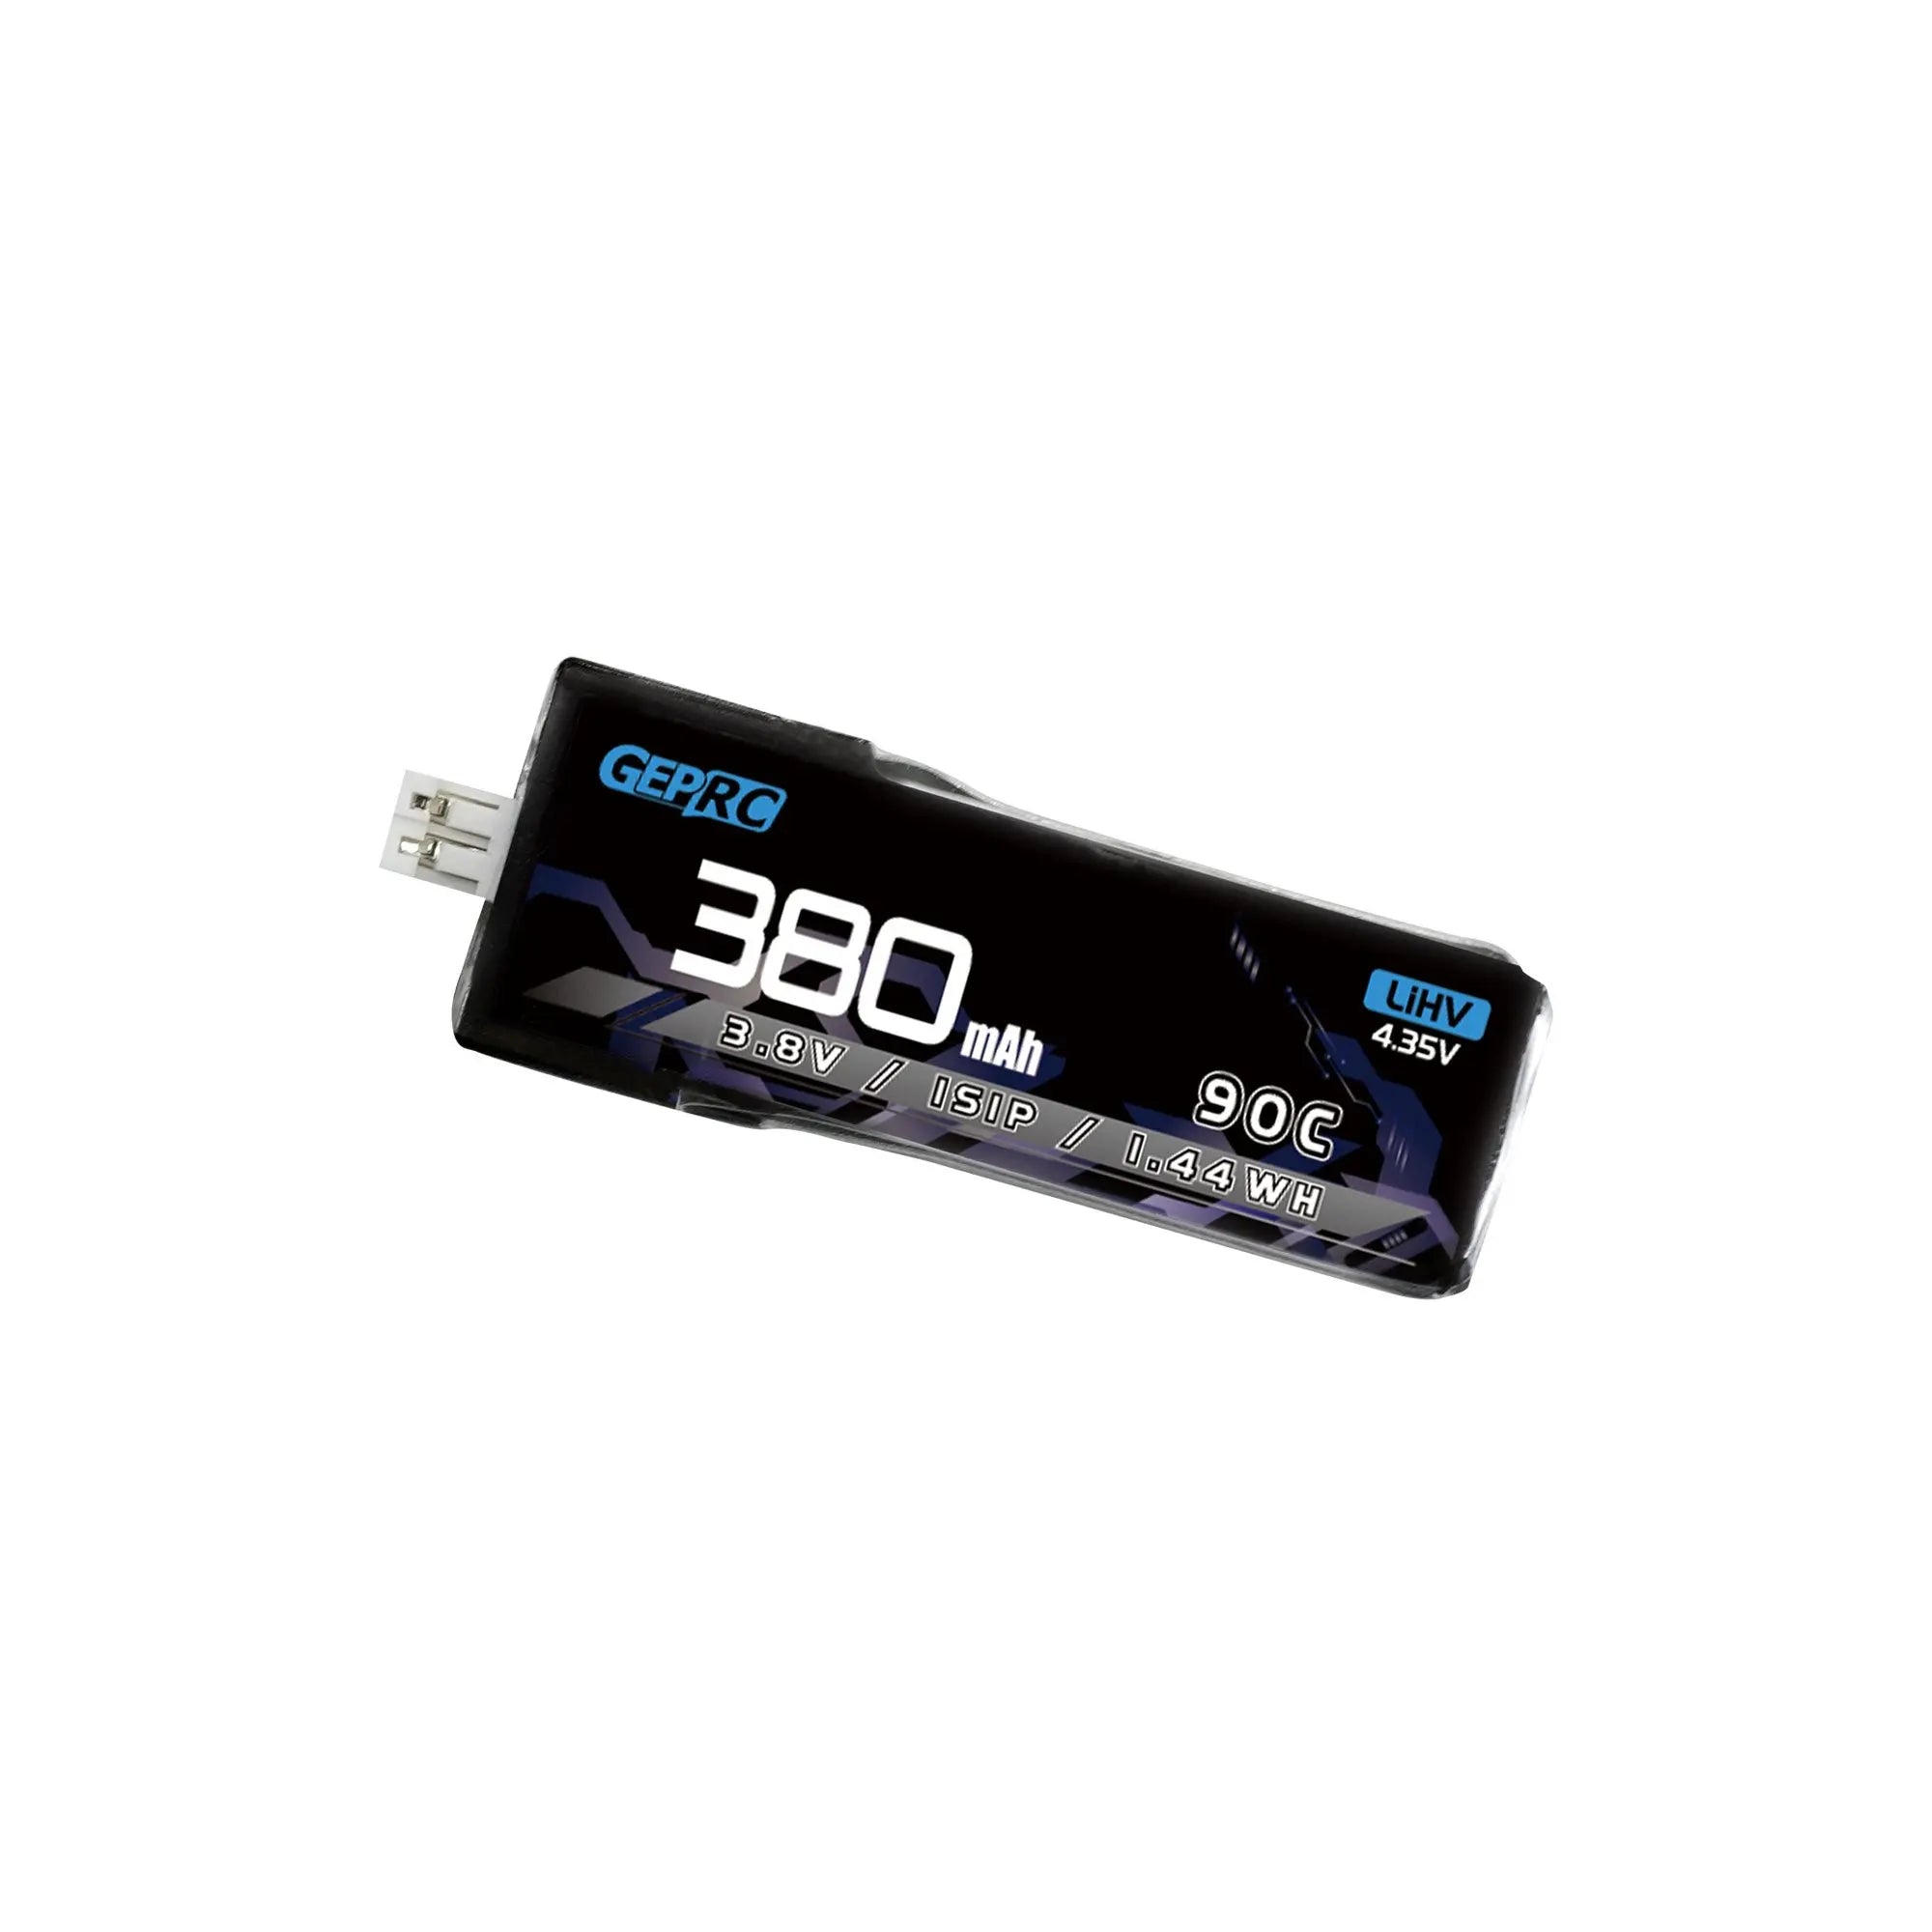 GEPRC 1S 380mAh 90C Battery, if it is serious, please consult a doctor